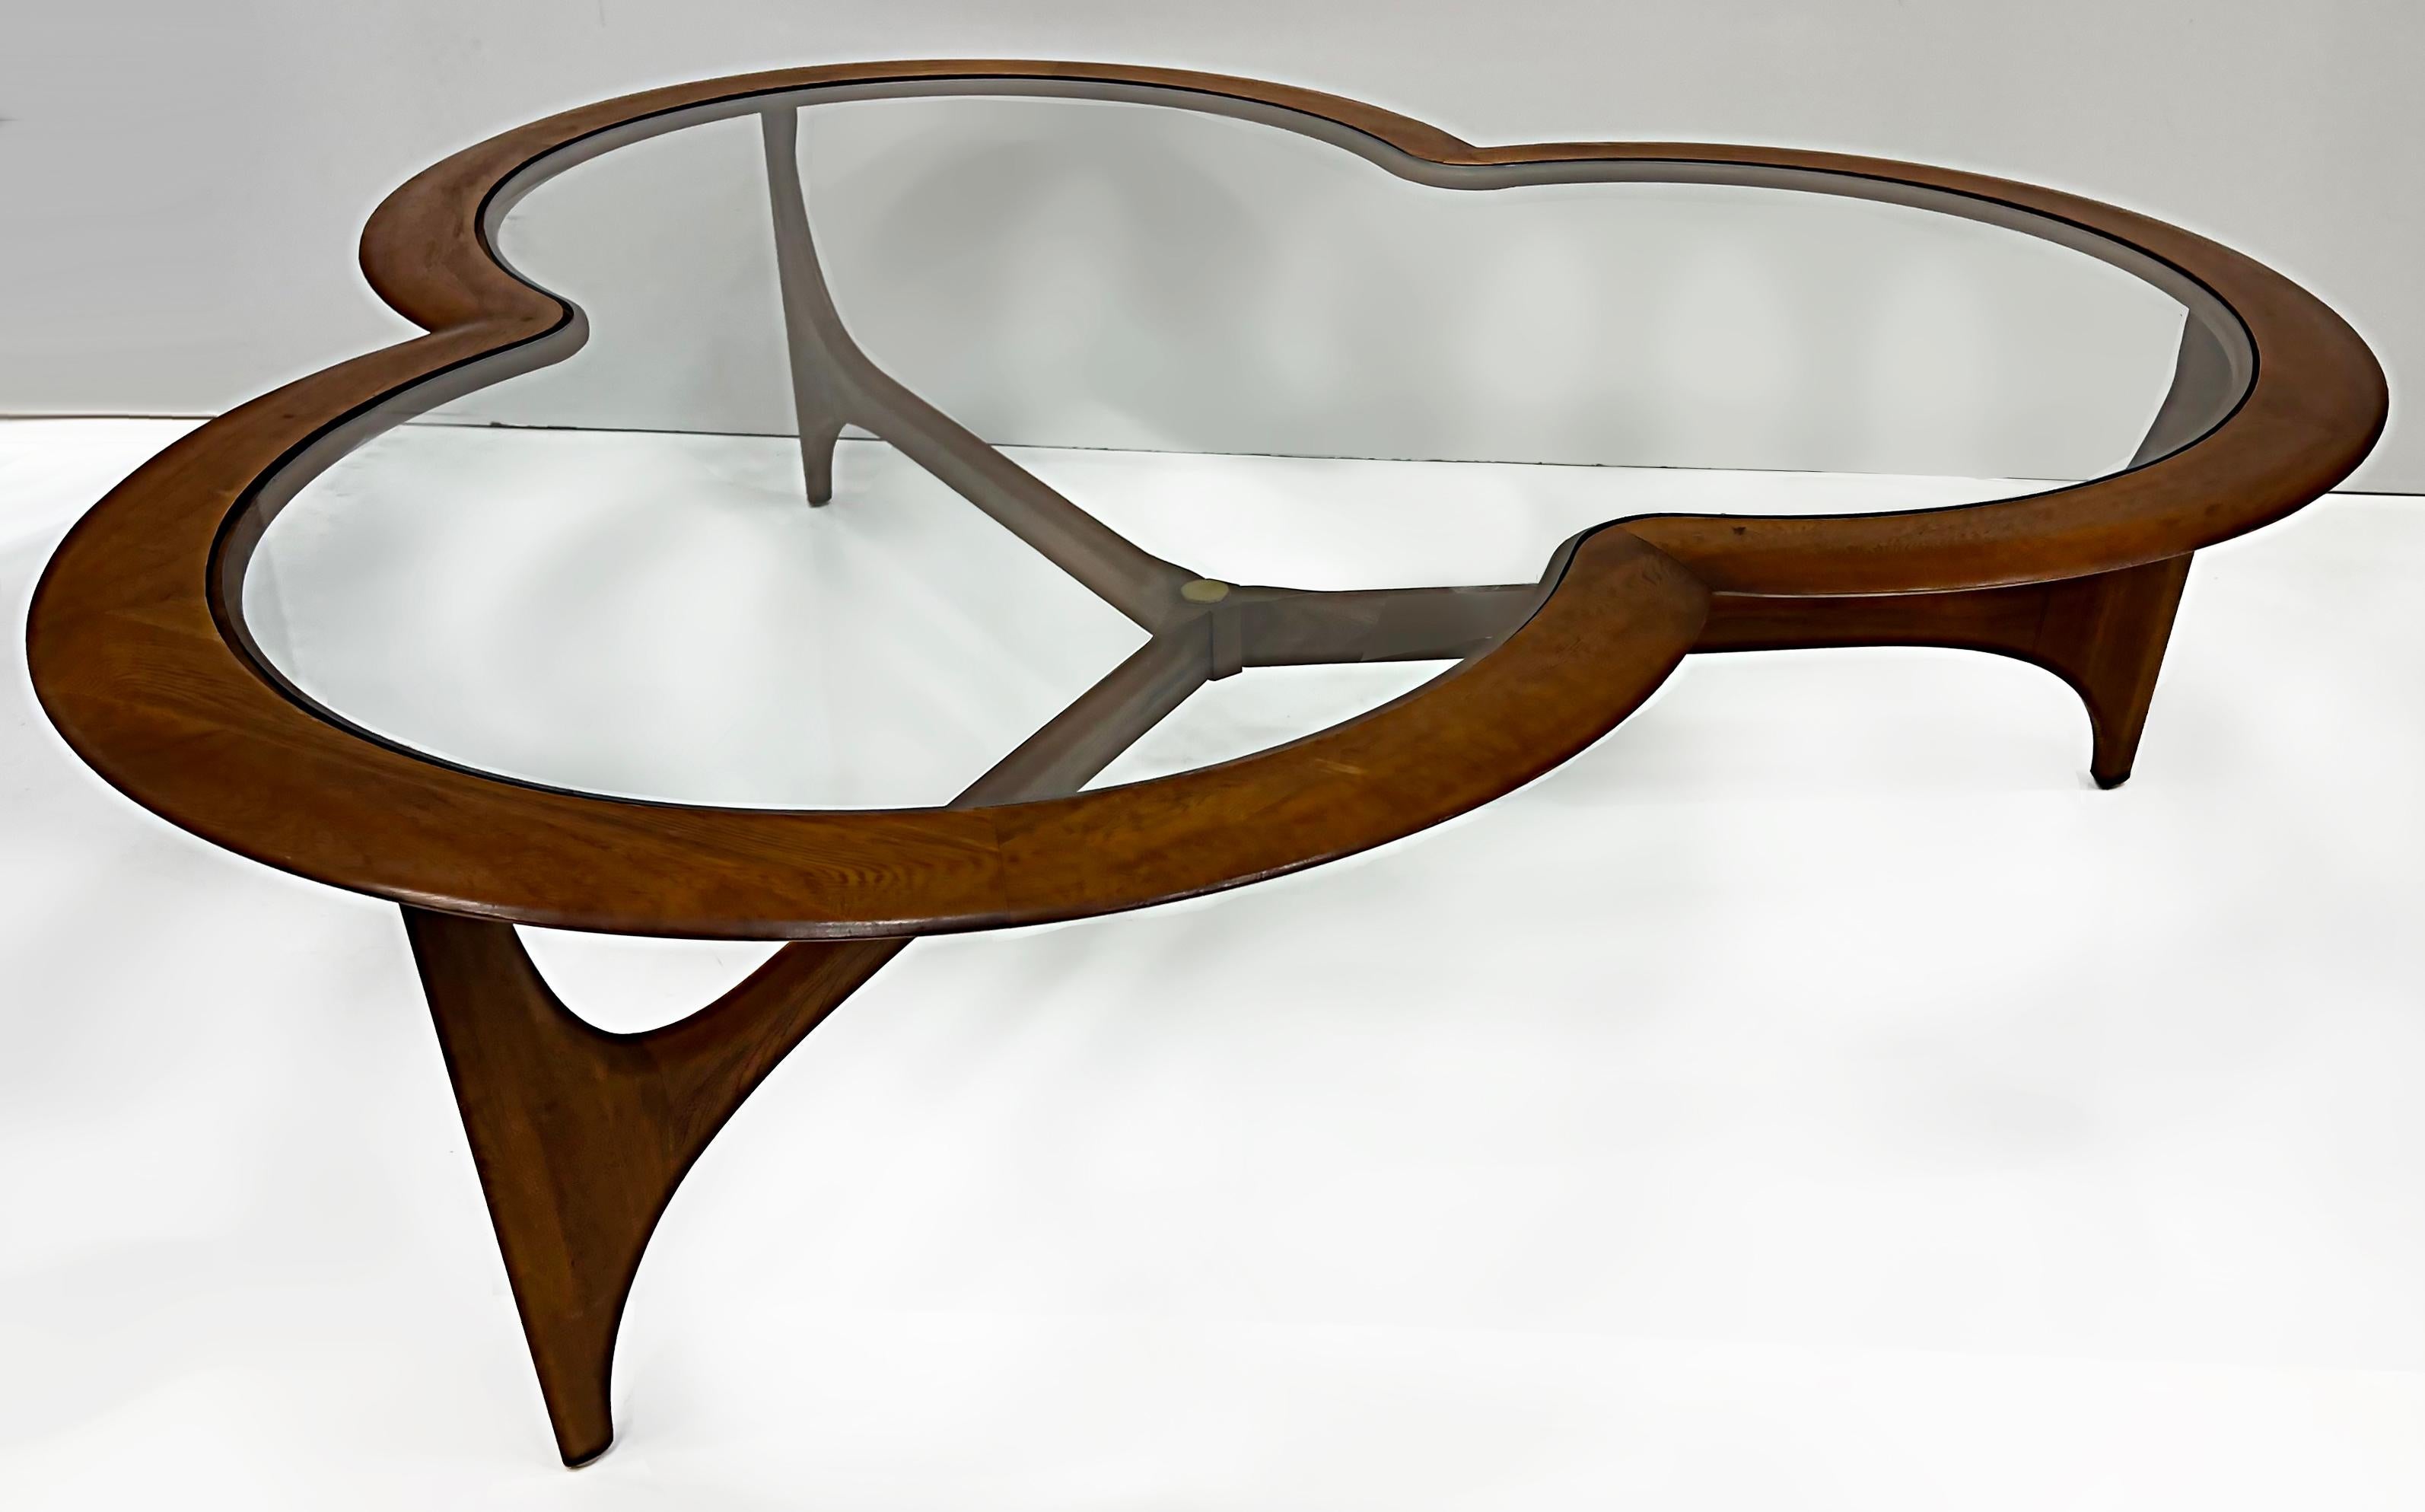 midcentury lane walnut trefoil clover Leaf coffee table with glass

Offered for sale this stunning overscale trefoil clover leaf shaped coffee table in walnut with an inset glass top. The table has the unusual trefoil form with three striking